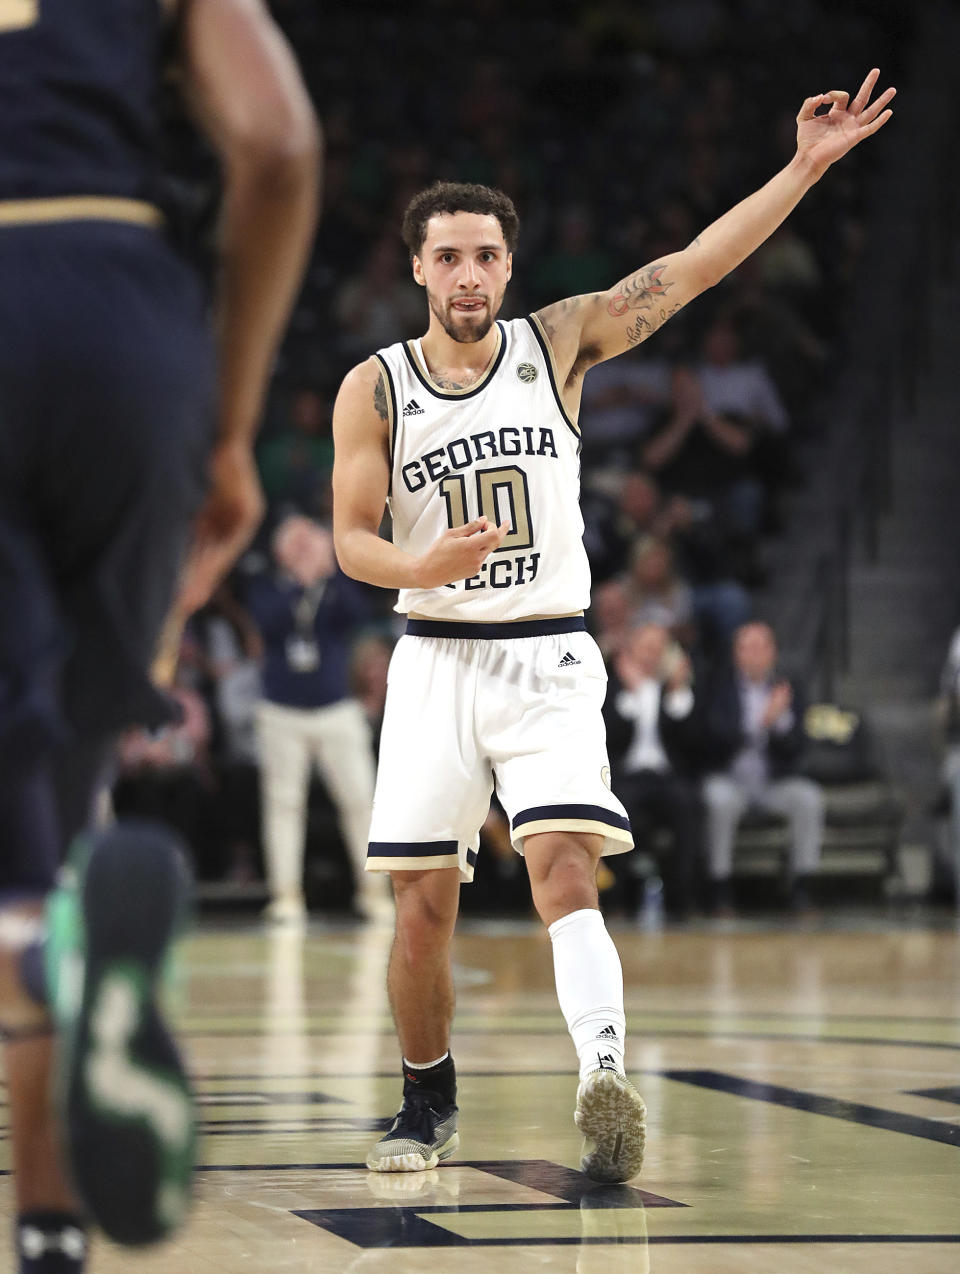 Georgia Tech guard Jose Alvarado plays air guitar after hitting a 3-pointer against Notre Dame during the first half of an NCAA college basketball game Wednesday, Jan. 15, 2020, in Atlanta. (Curtis Compton/Atlanta Journal-Constitution via AP)